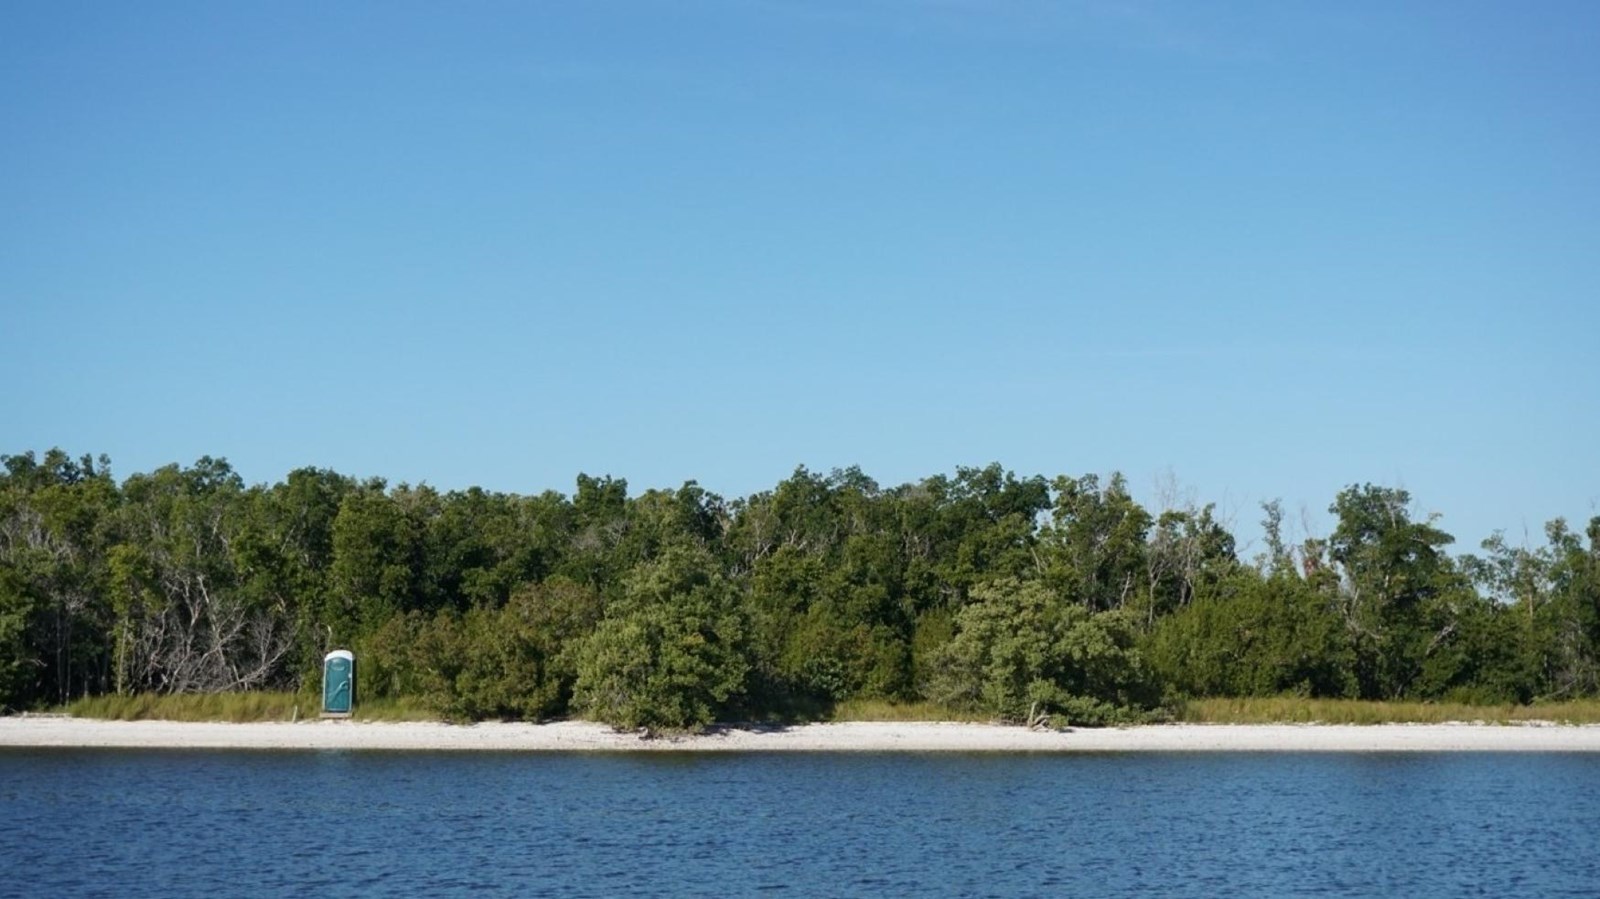 White sandy shoreline with blue water and green vegetation covering the land.